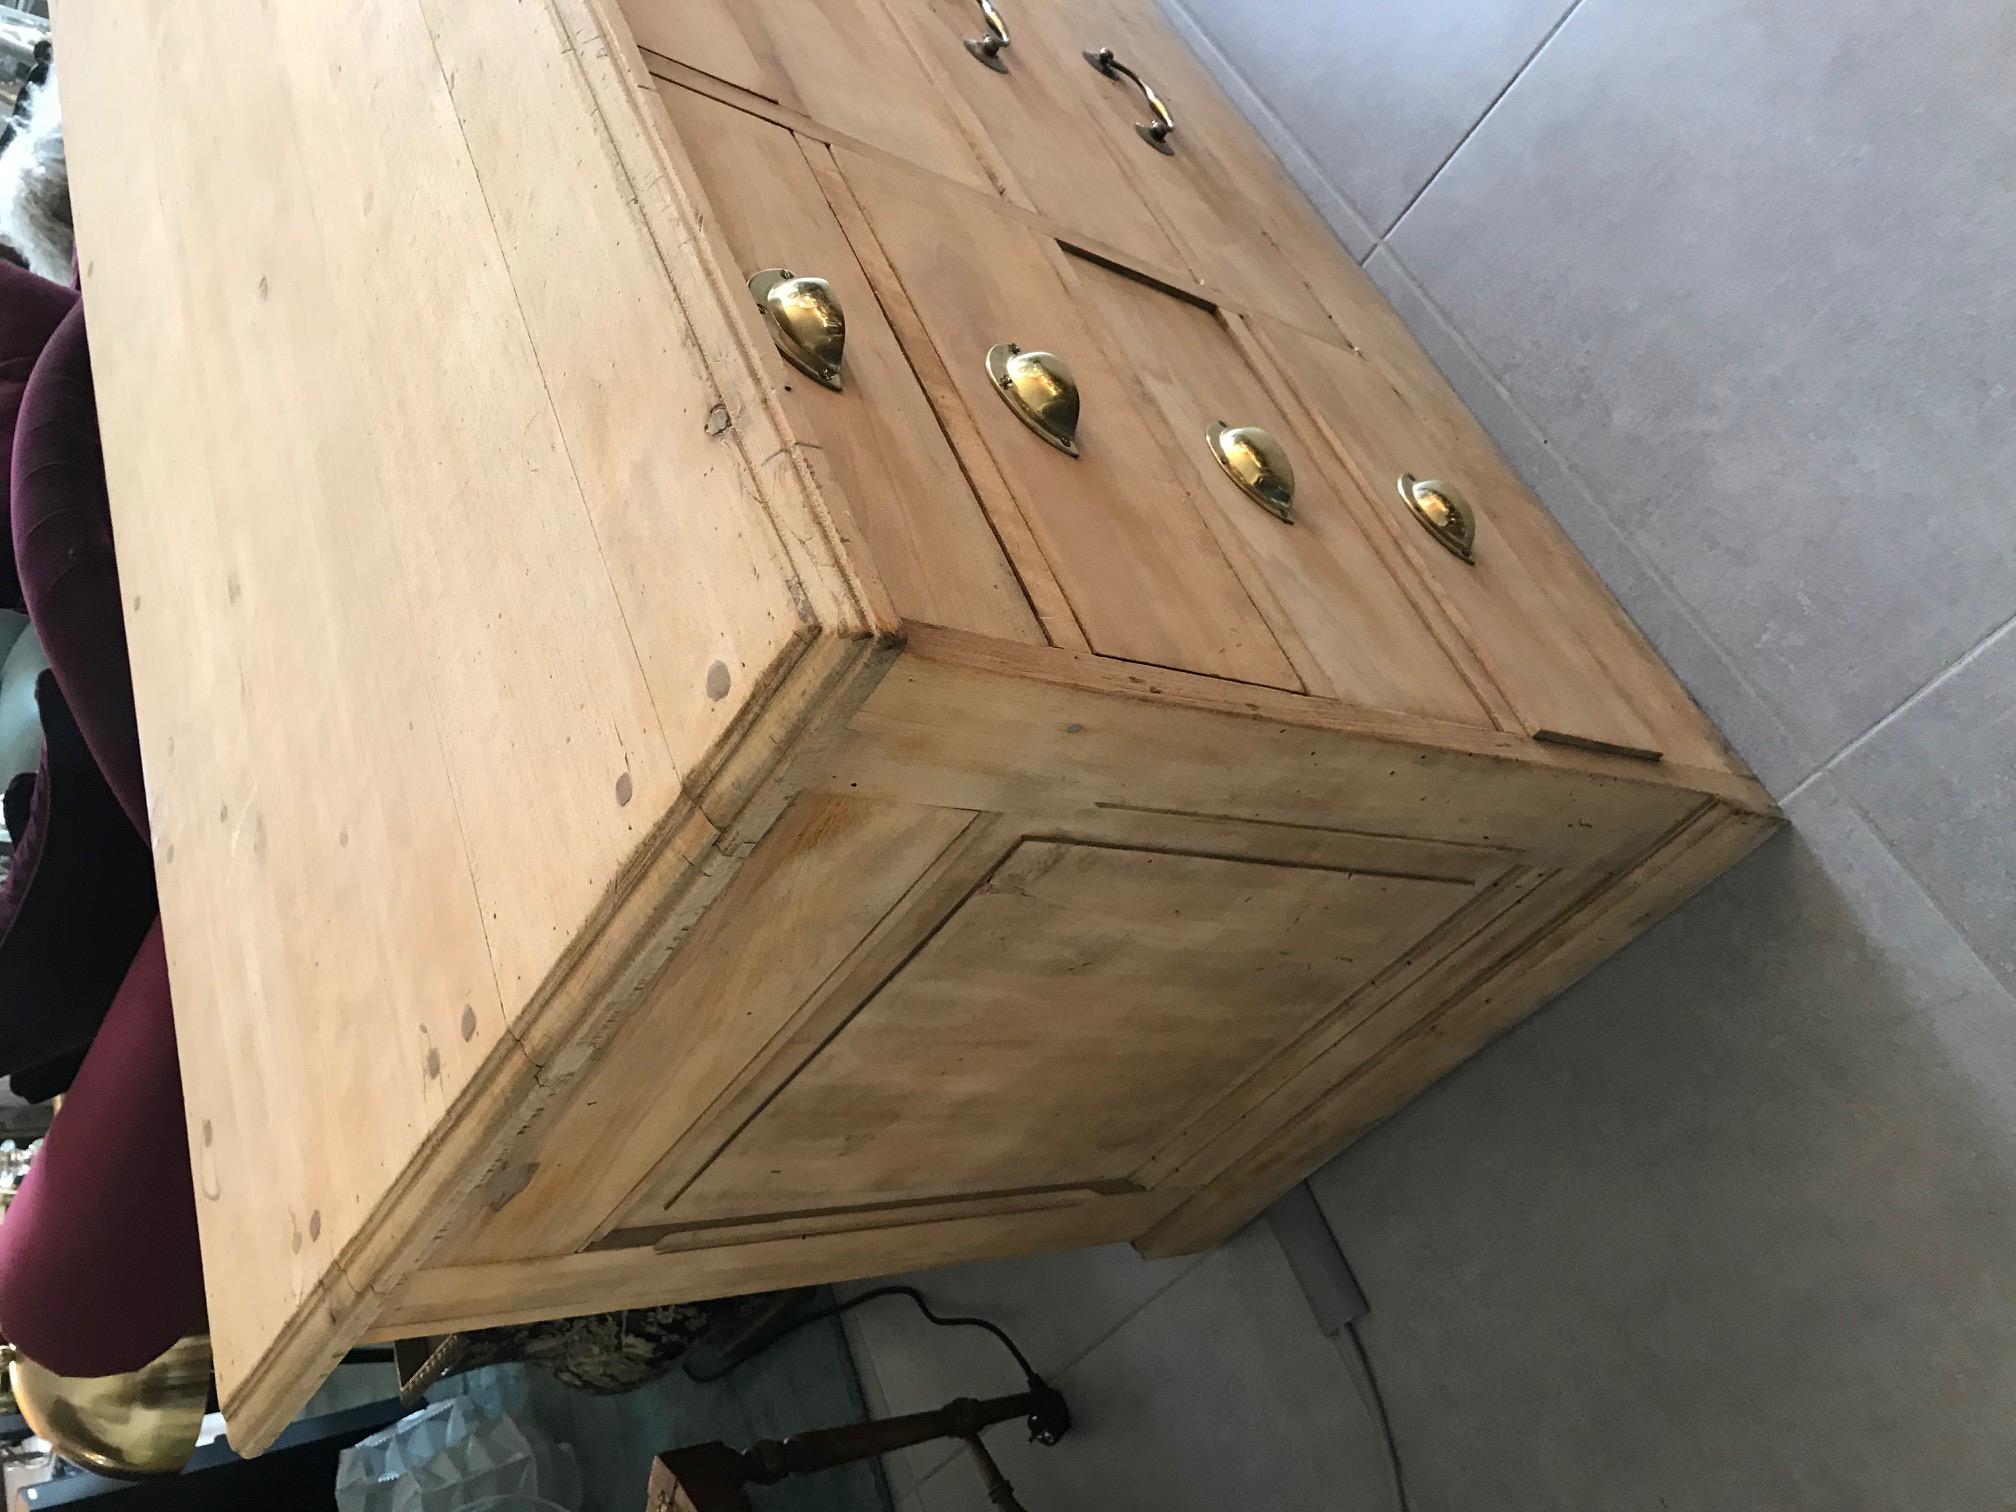 Beautiful 20th century French beech chests of drawer from the 1920s.
Gilded brass handles. Four large drawers in the middle and eight smaller drawer at the extremities.
Very nice quality. This kind of furniture use to be in shop to exposed